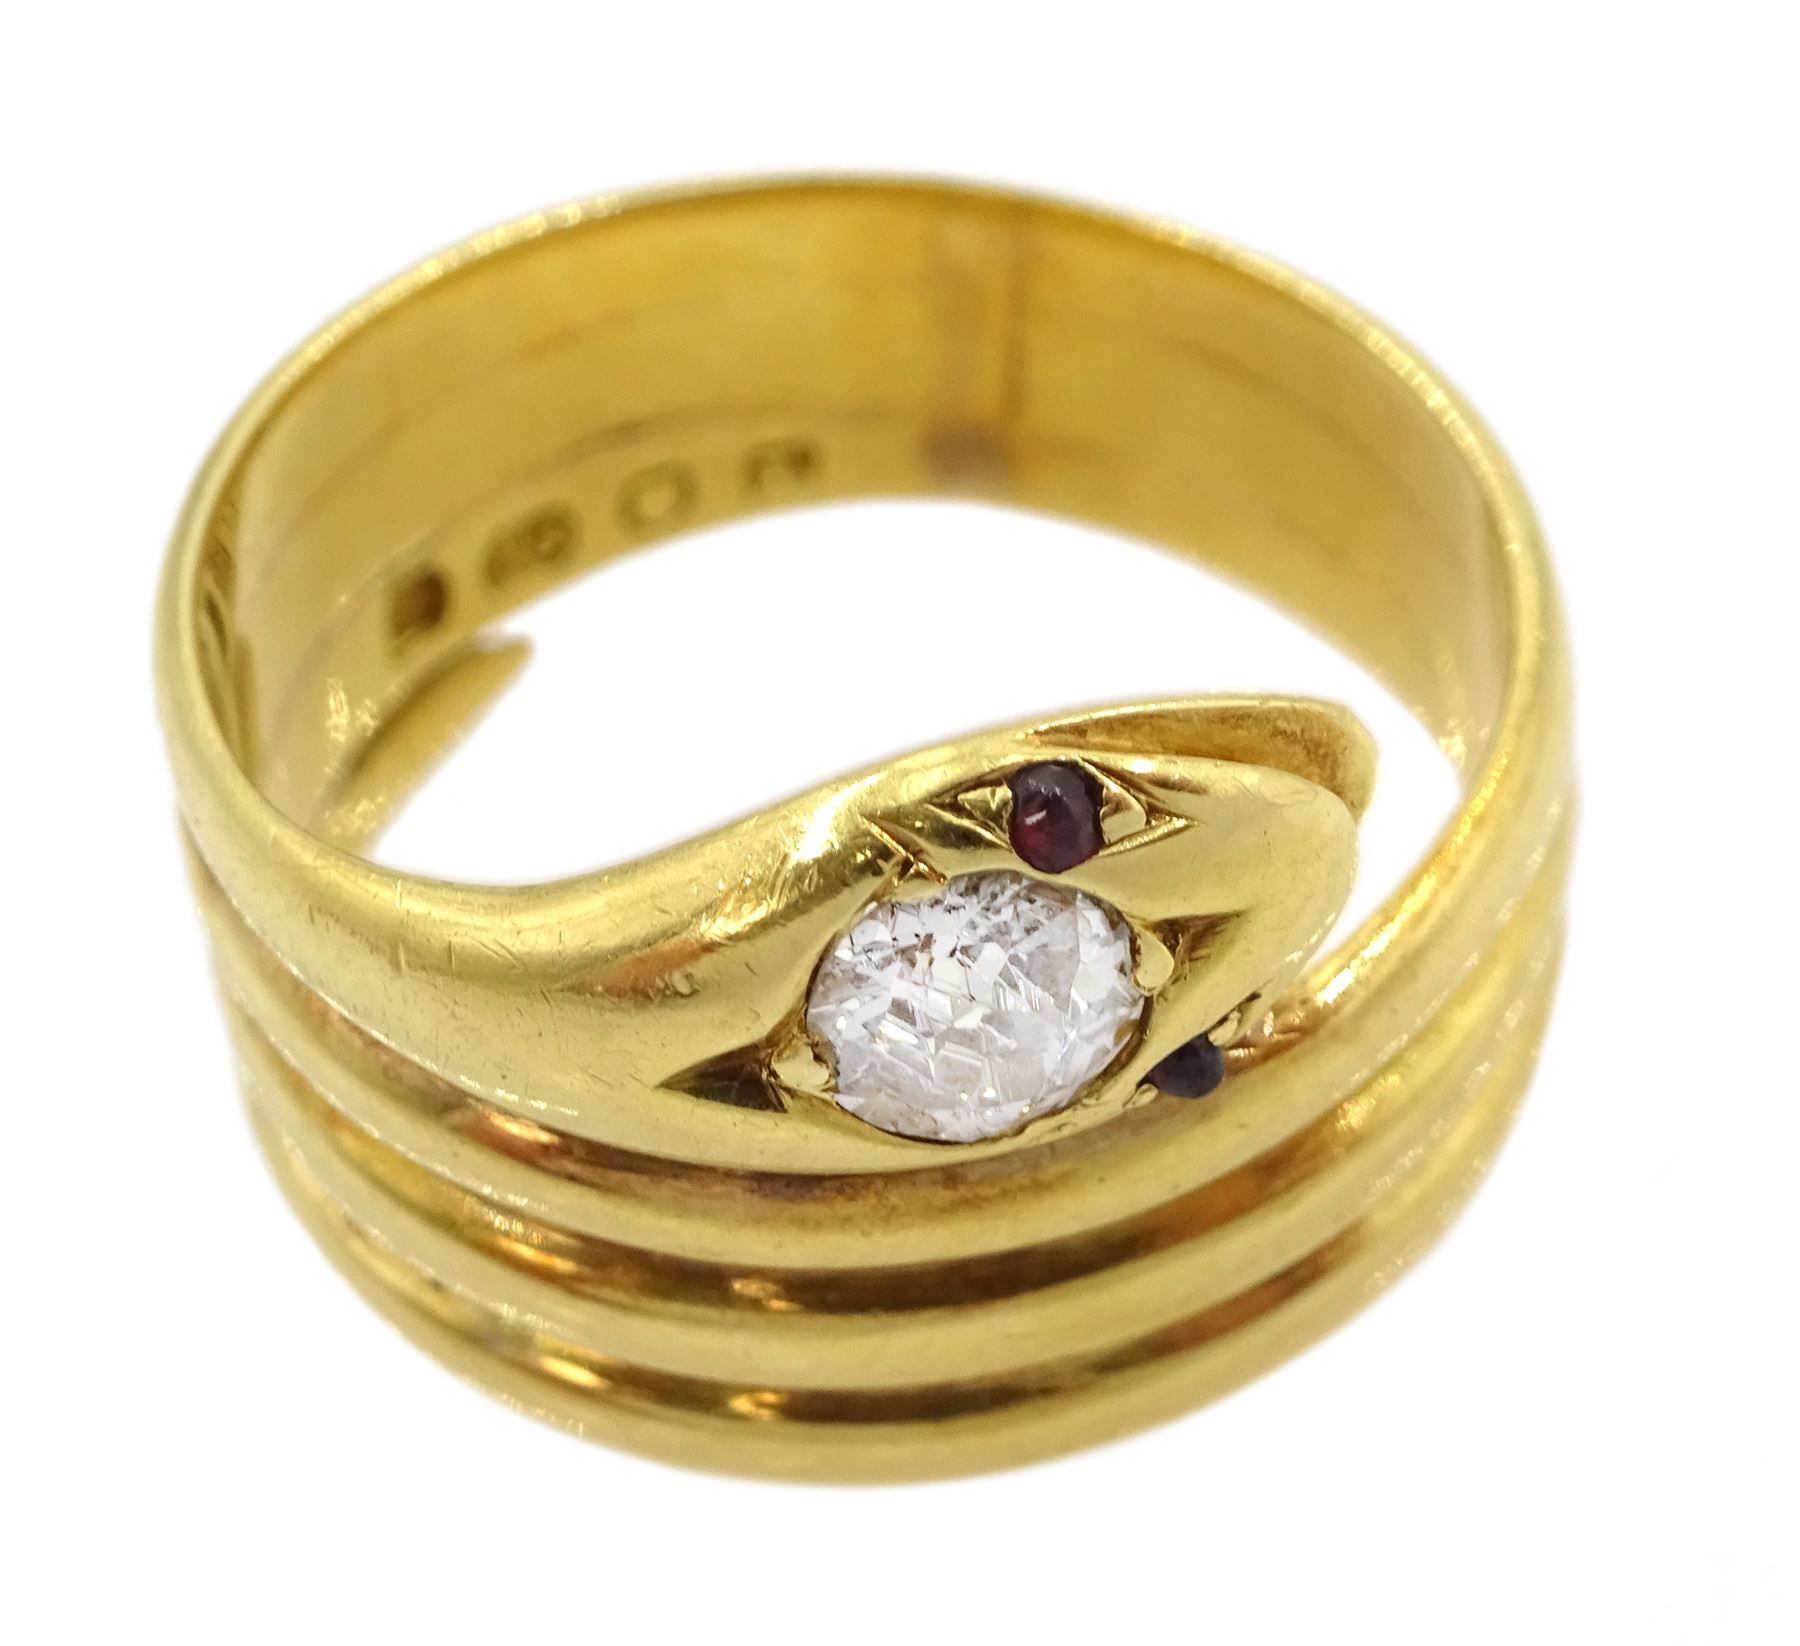 Victorian 18ct gold coiled snake ring - Image 4 of 7